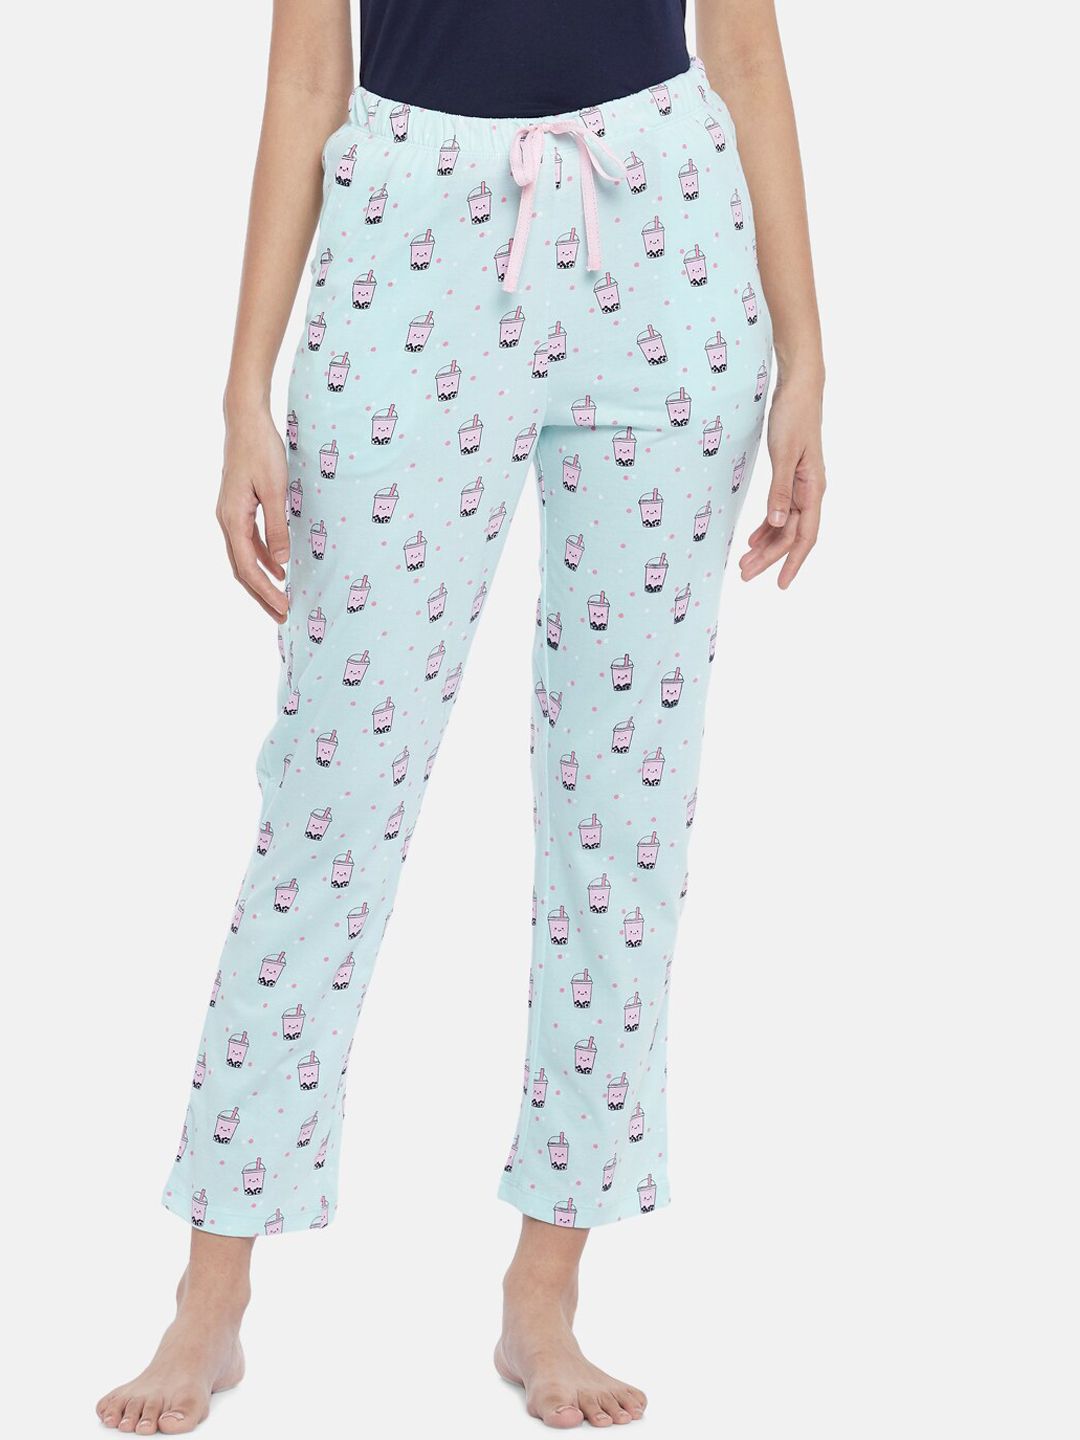 Dreamz by Pantaloons Women Pink & Blue Printed Cotton Lounge Pants Price in India